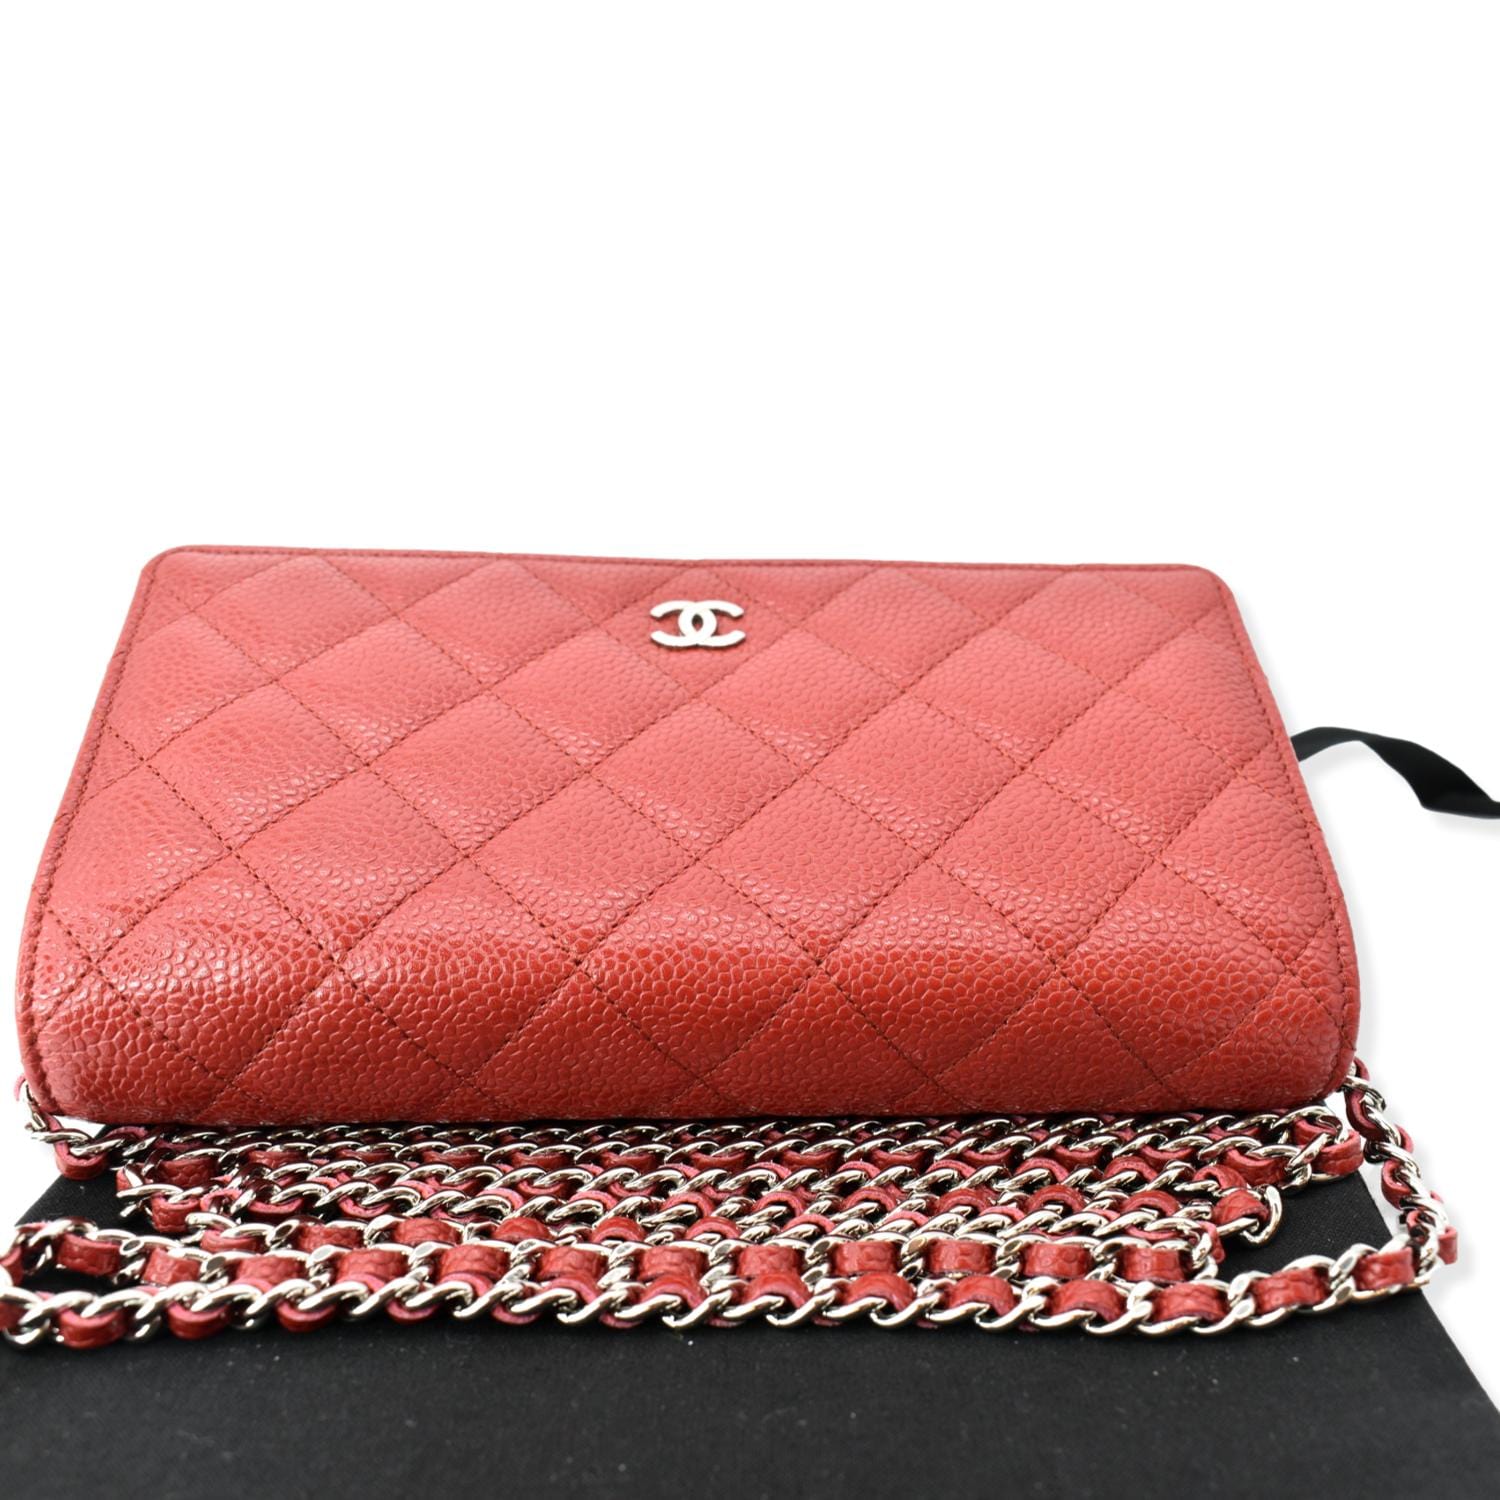 Chanel Caviar WOC in Red- MORE THAN YOU CAN IMAGINE